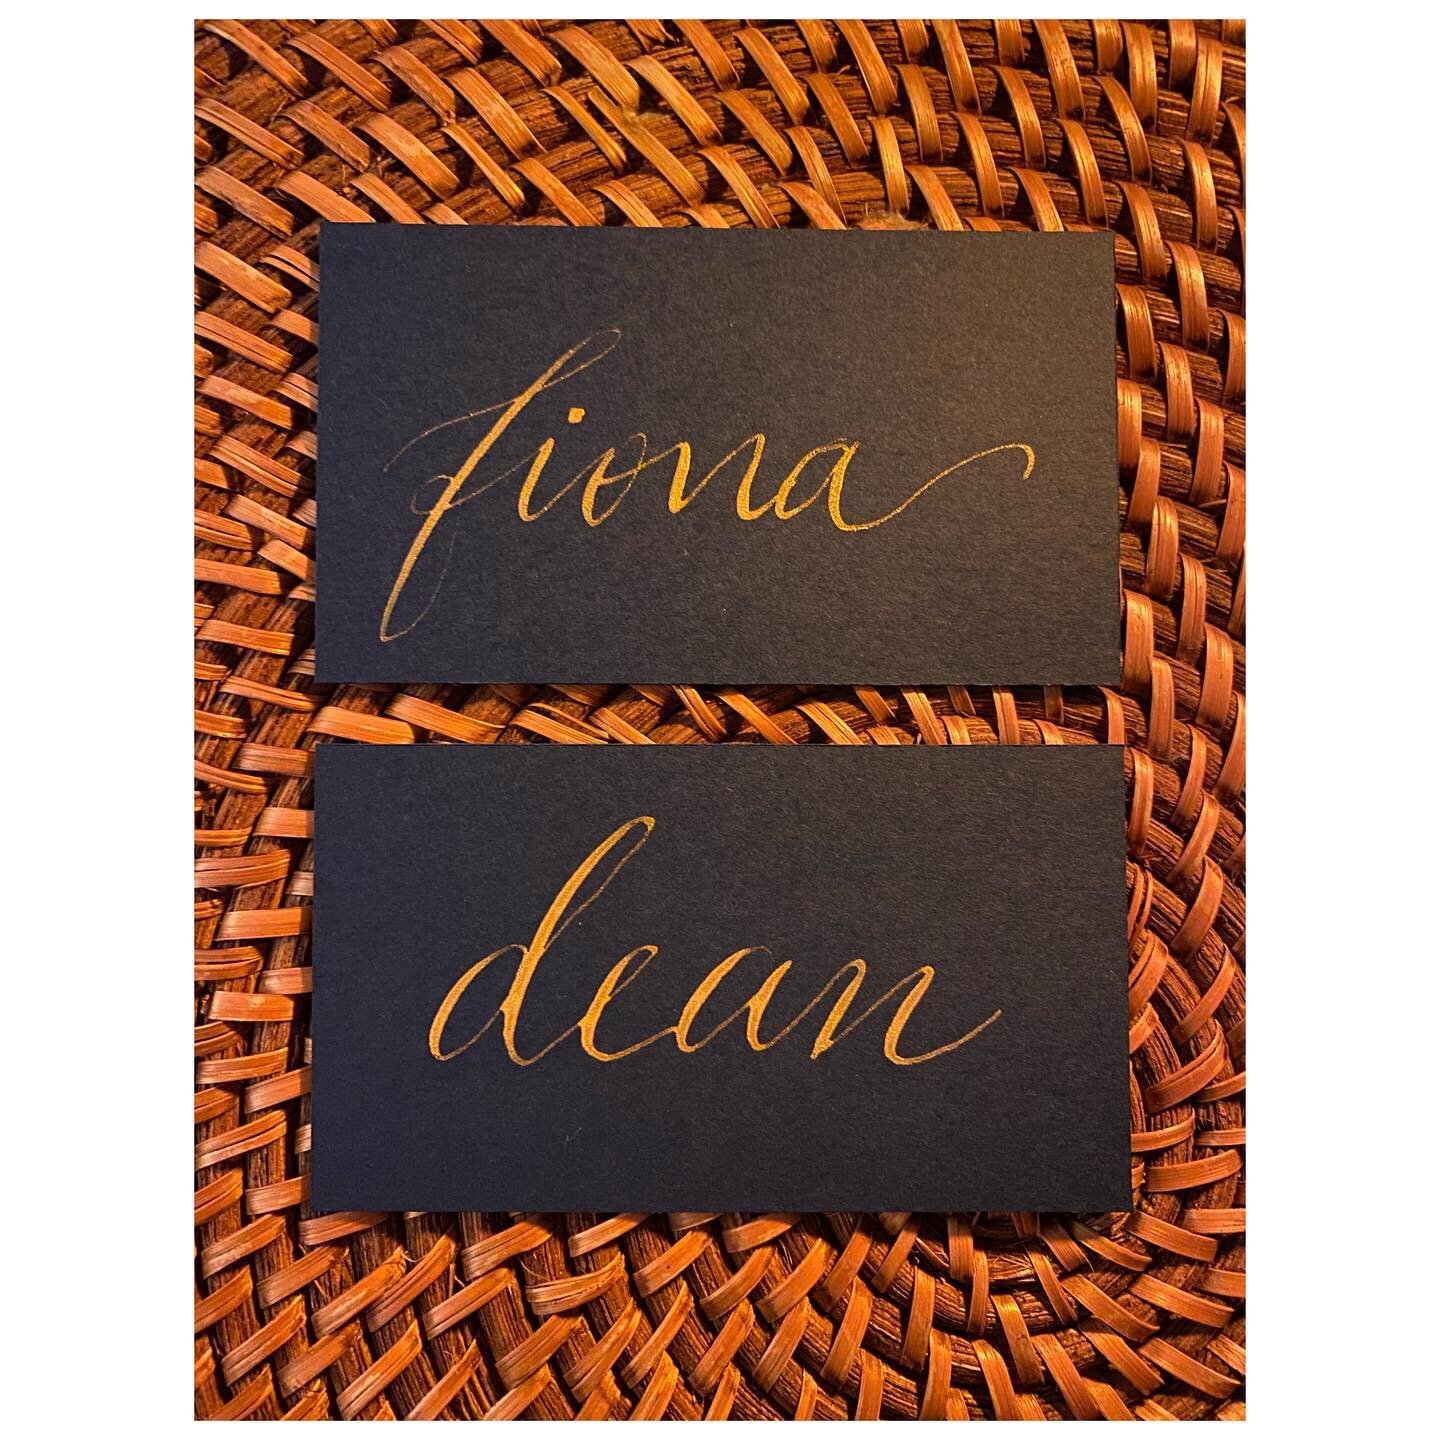 now offering place cards for your socially distant thanksgiving dinners 🦃

$3/flat card or $4/tented card . navy, forest green, slate or white cards with gold, silver or black ink. shipping incl.

dm or email me to order by 11/19 🎯 

all proceeds b